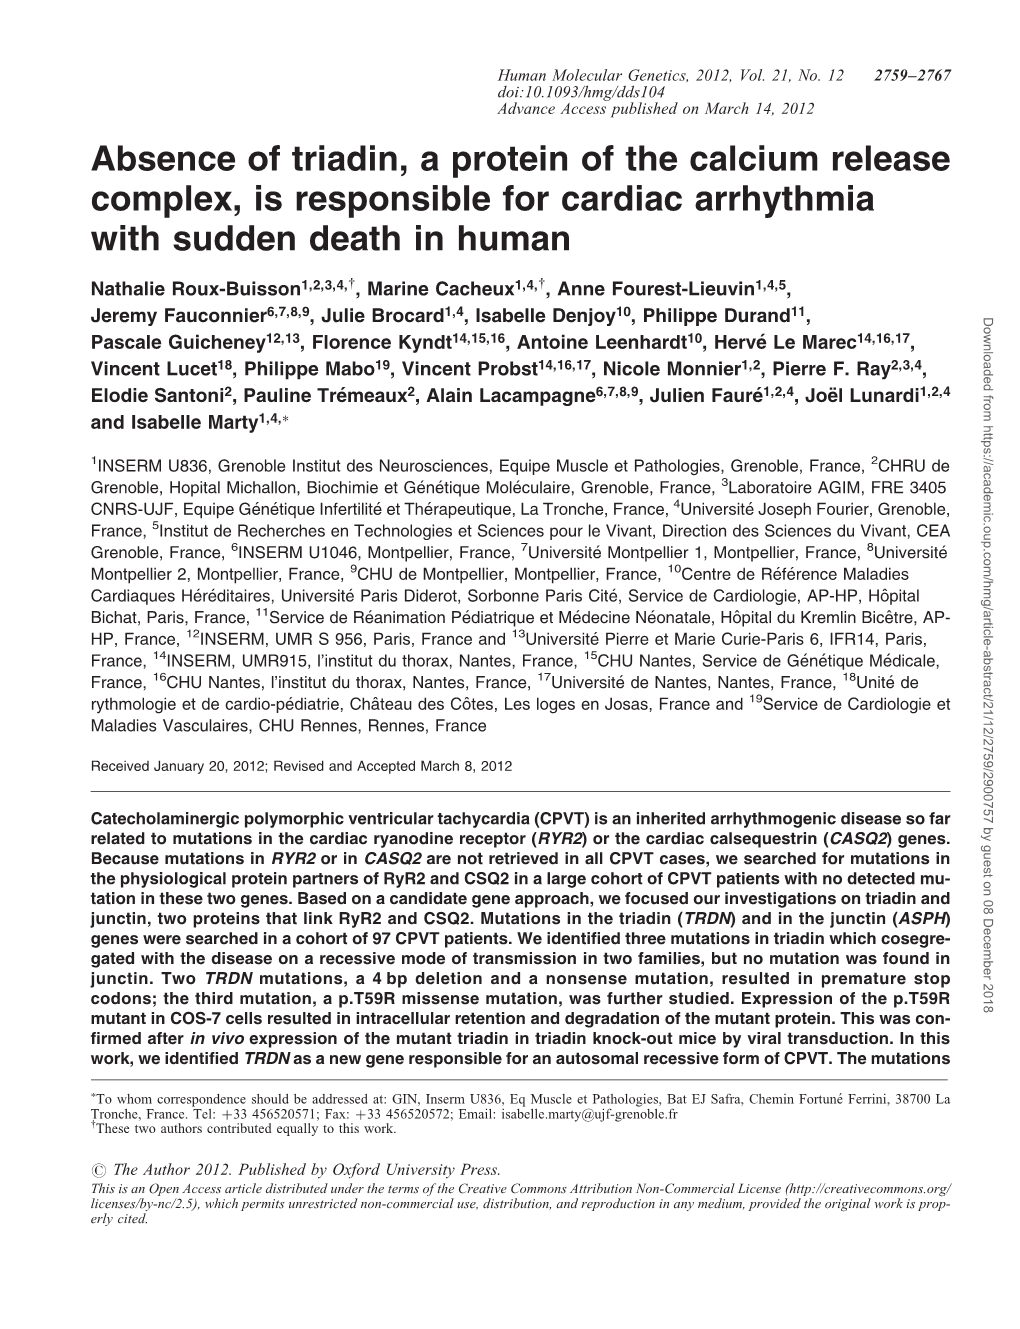 Absence of Triadin, a Protein of the Calcium Release Complex, Is Responsible for Cardiac Arrhythmia with Sudden Death in Human